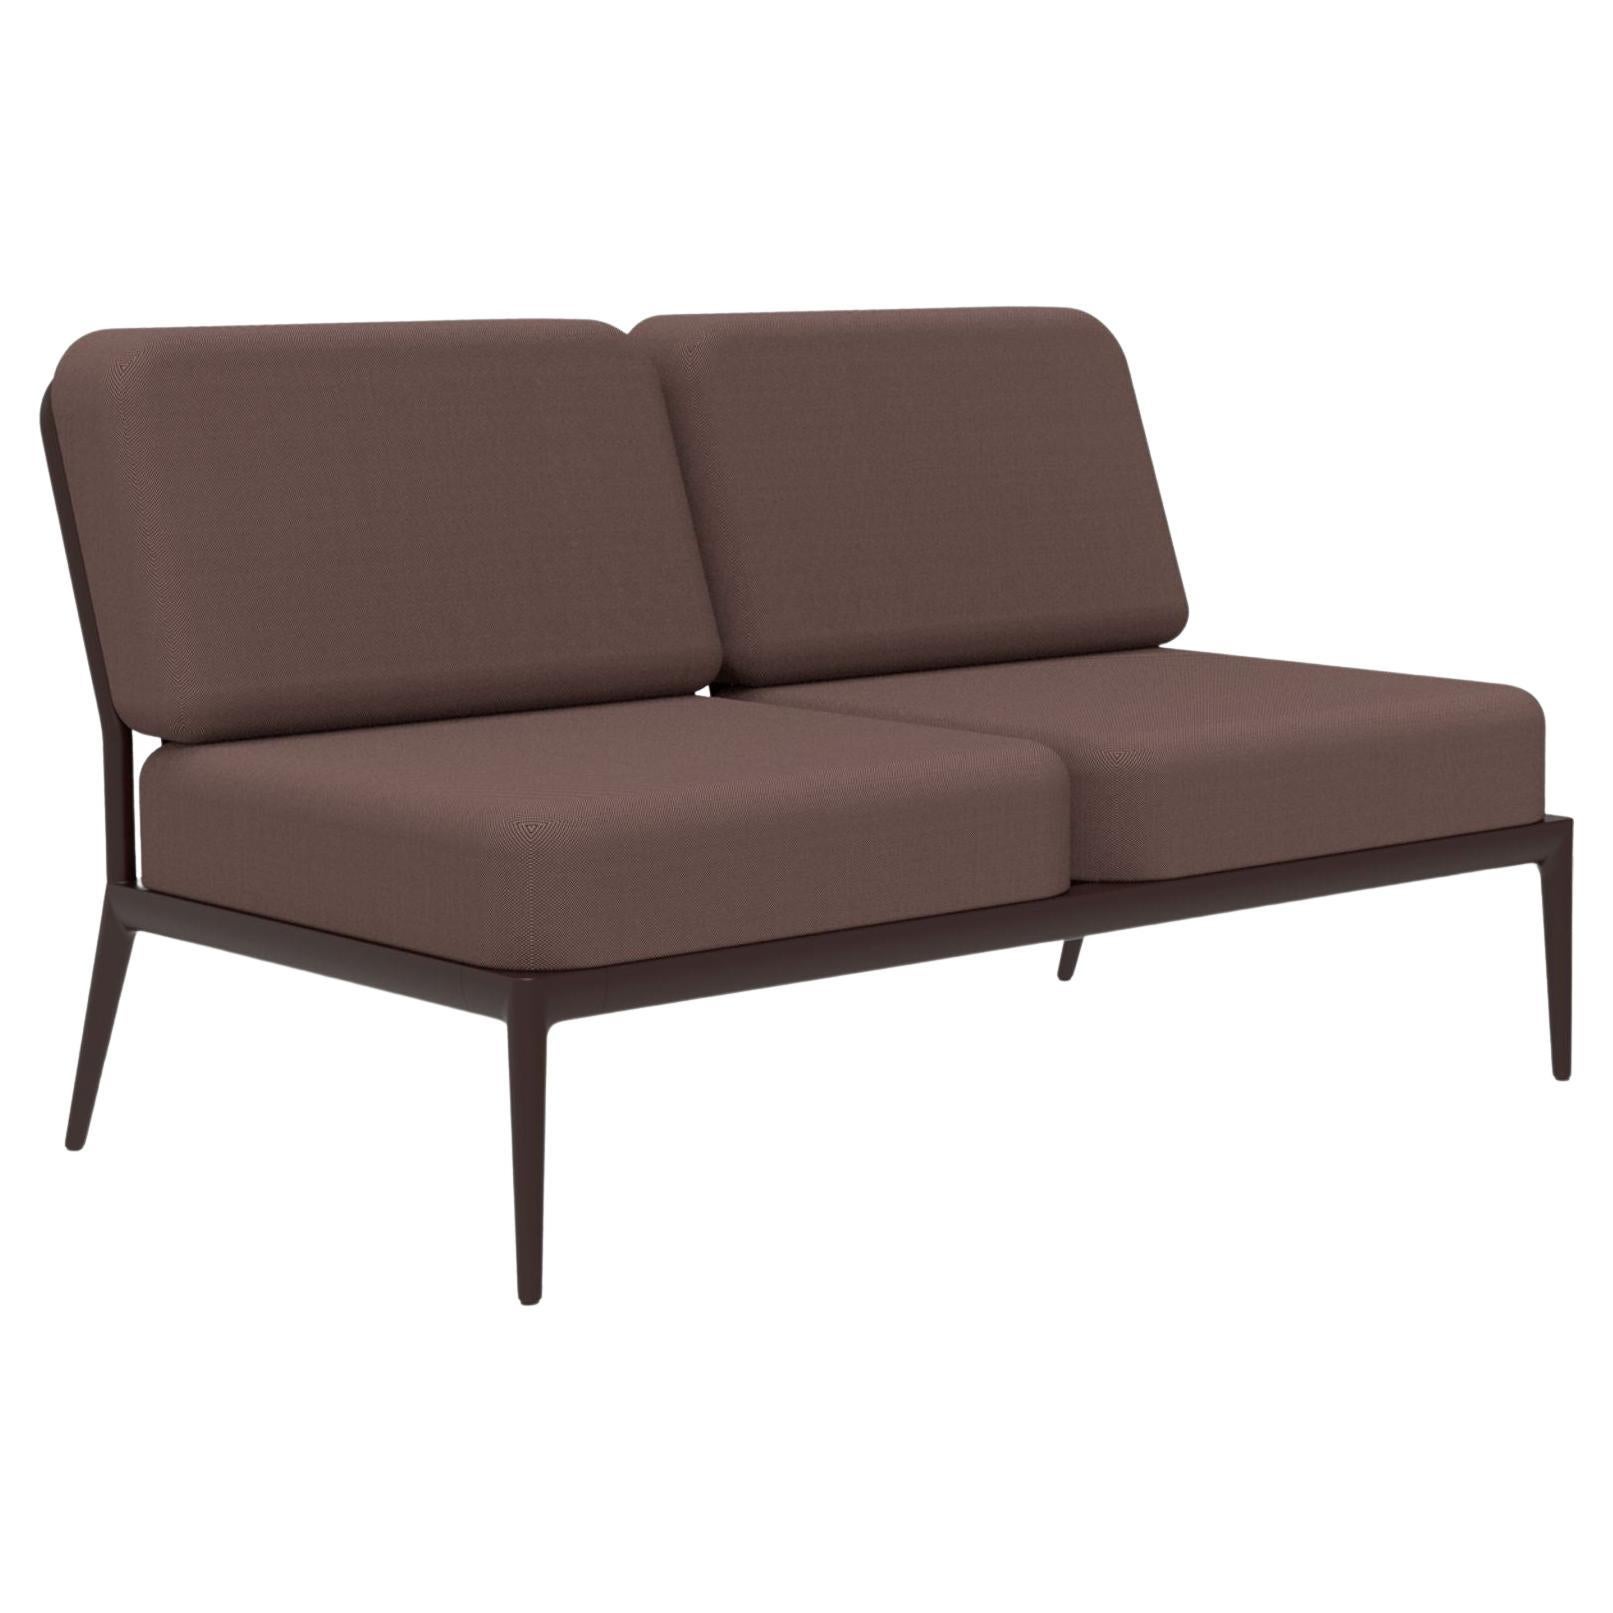 Ribbons Chocolate Double Central Modular Sofa by MOWEE